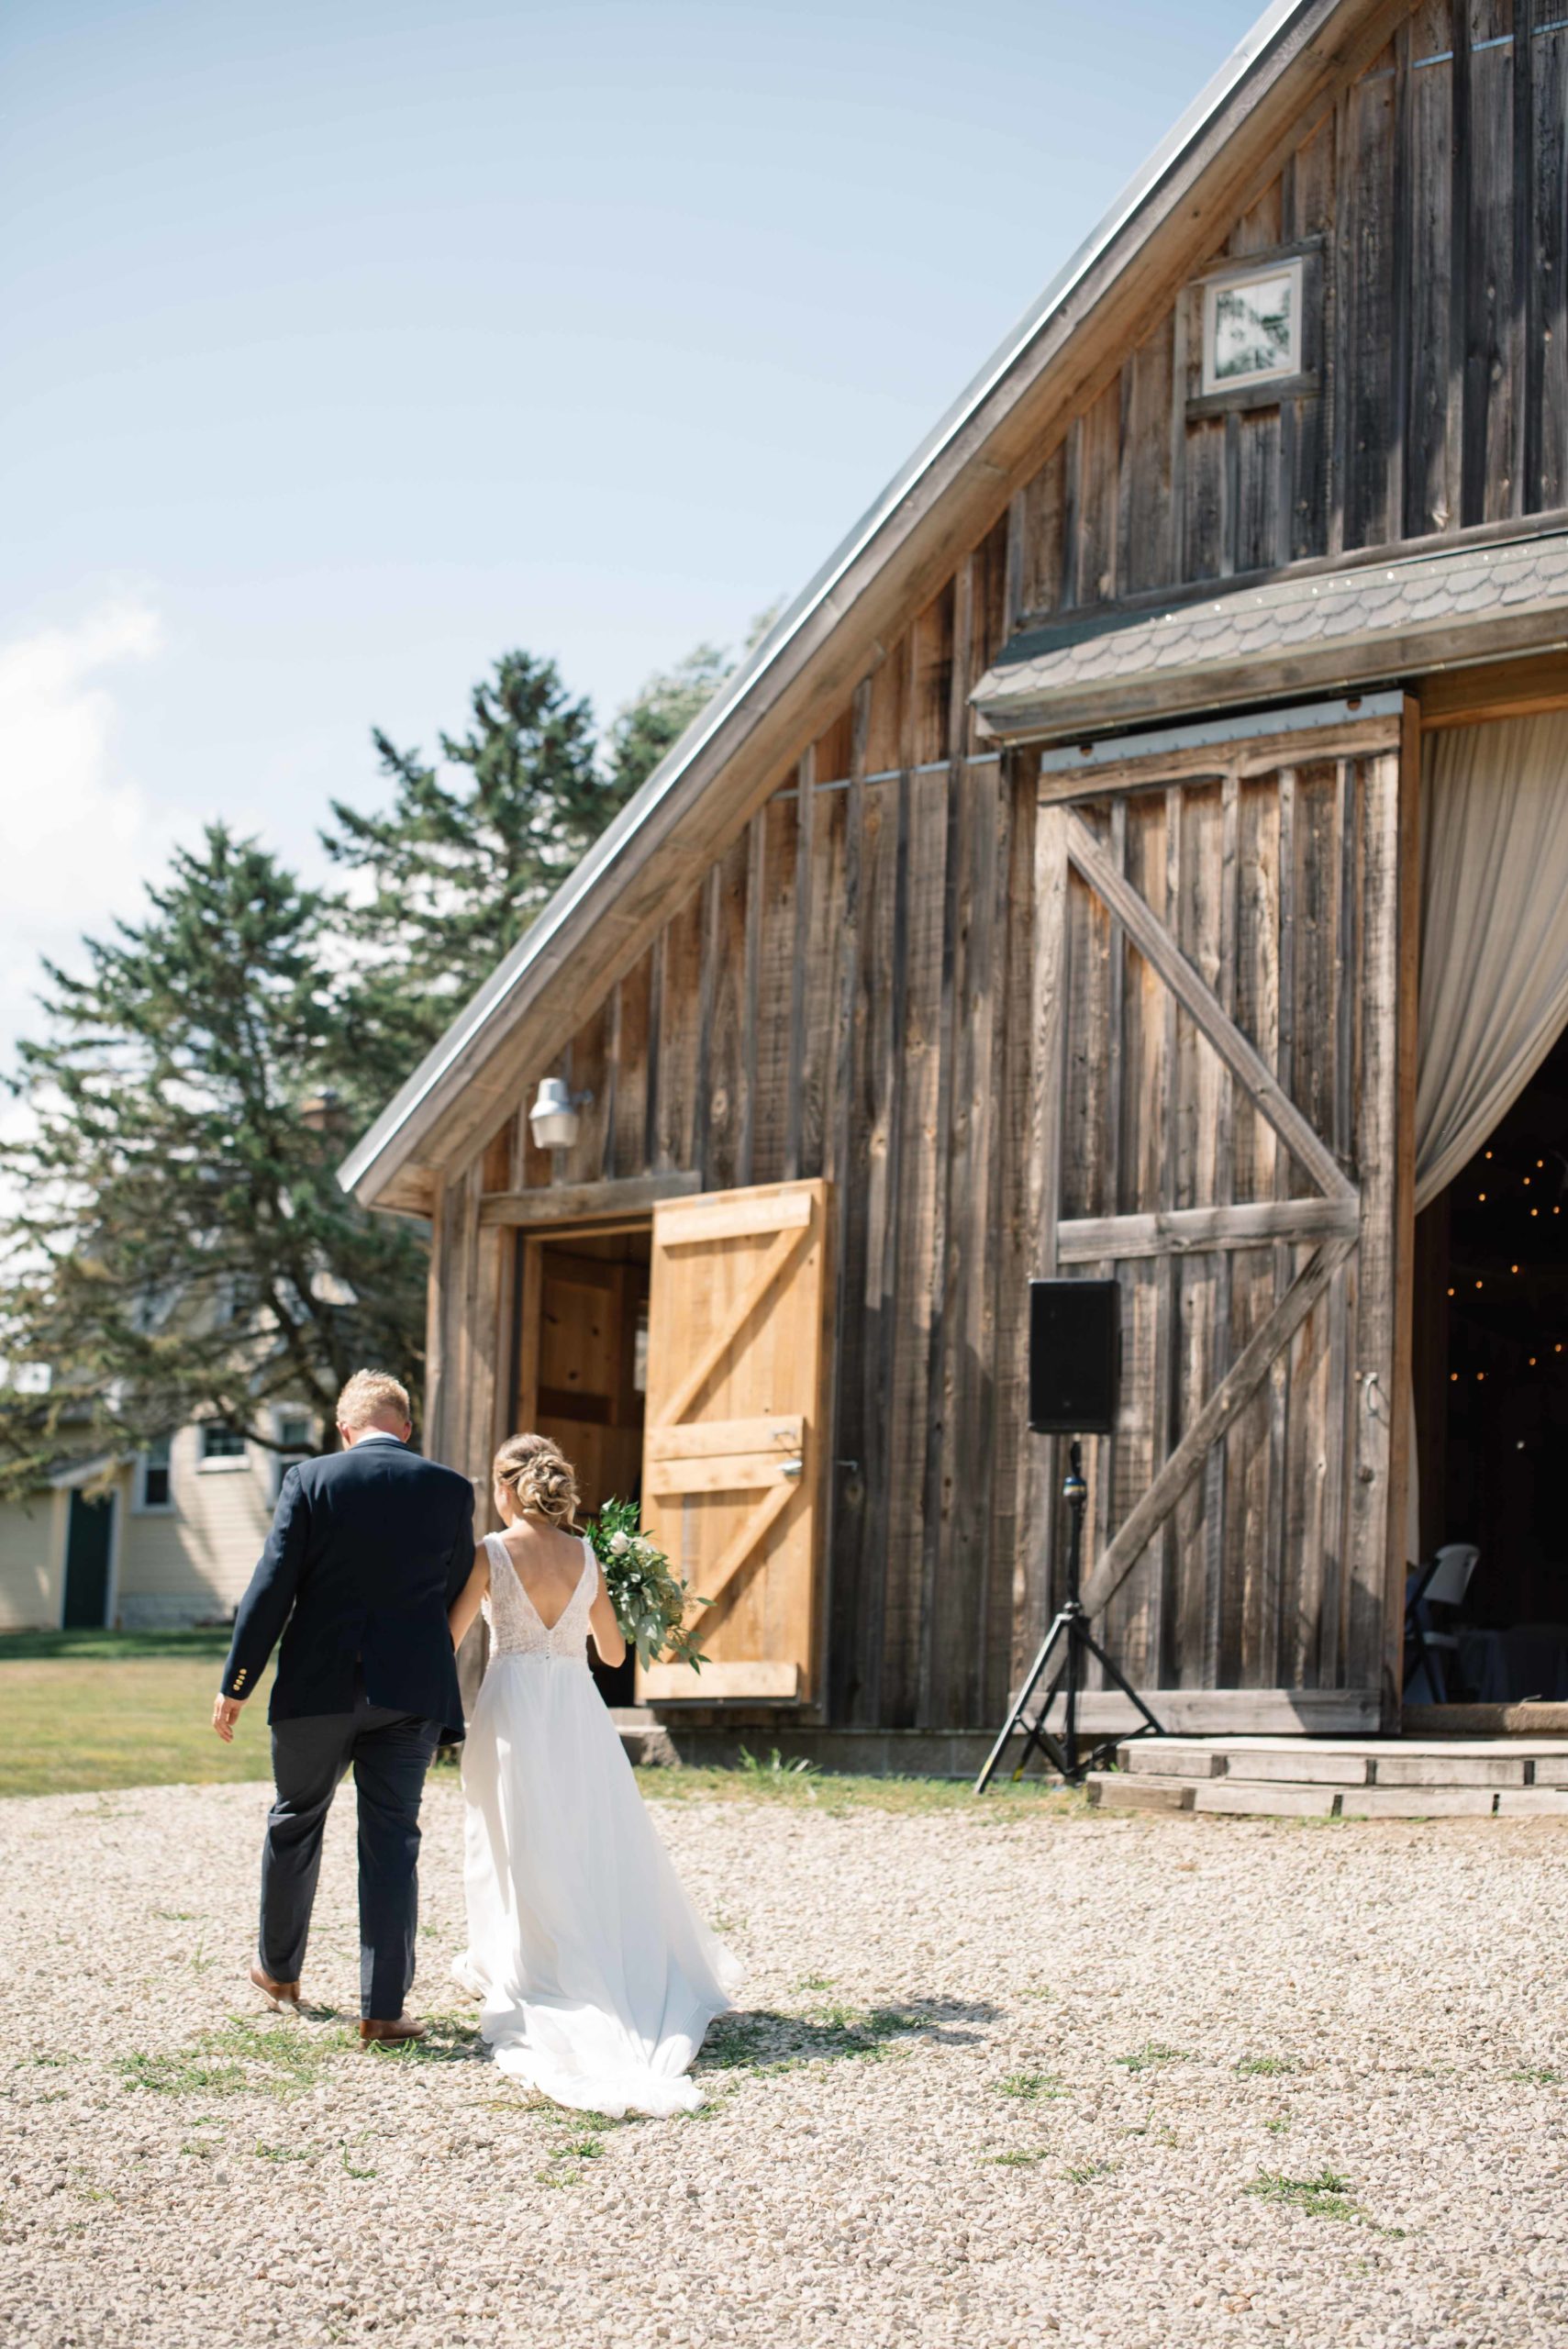 groom crying as he sees his bride for the first time outdoor Iowa wedding ceremony schafer century barn wedding venue